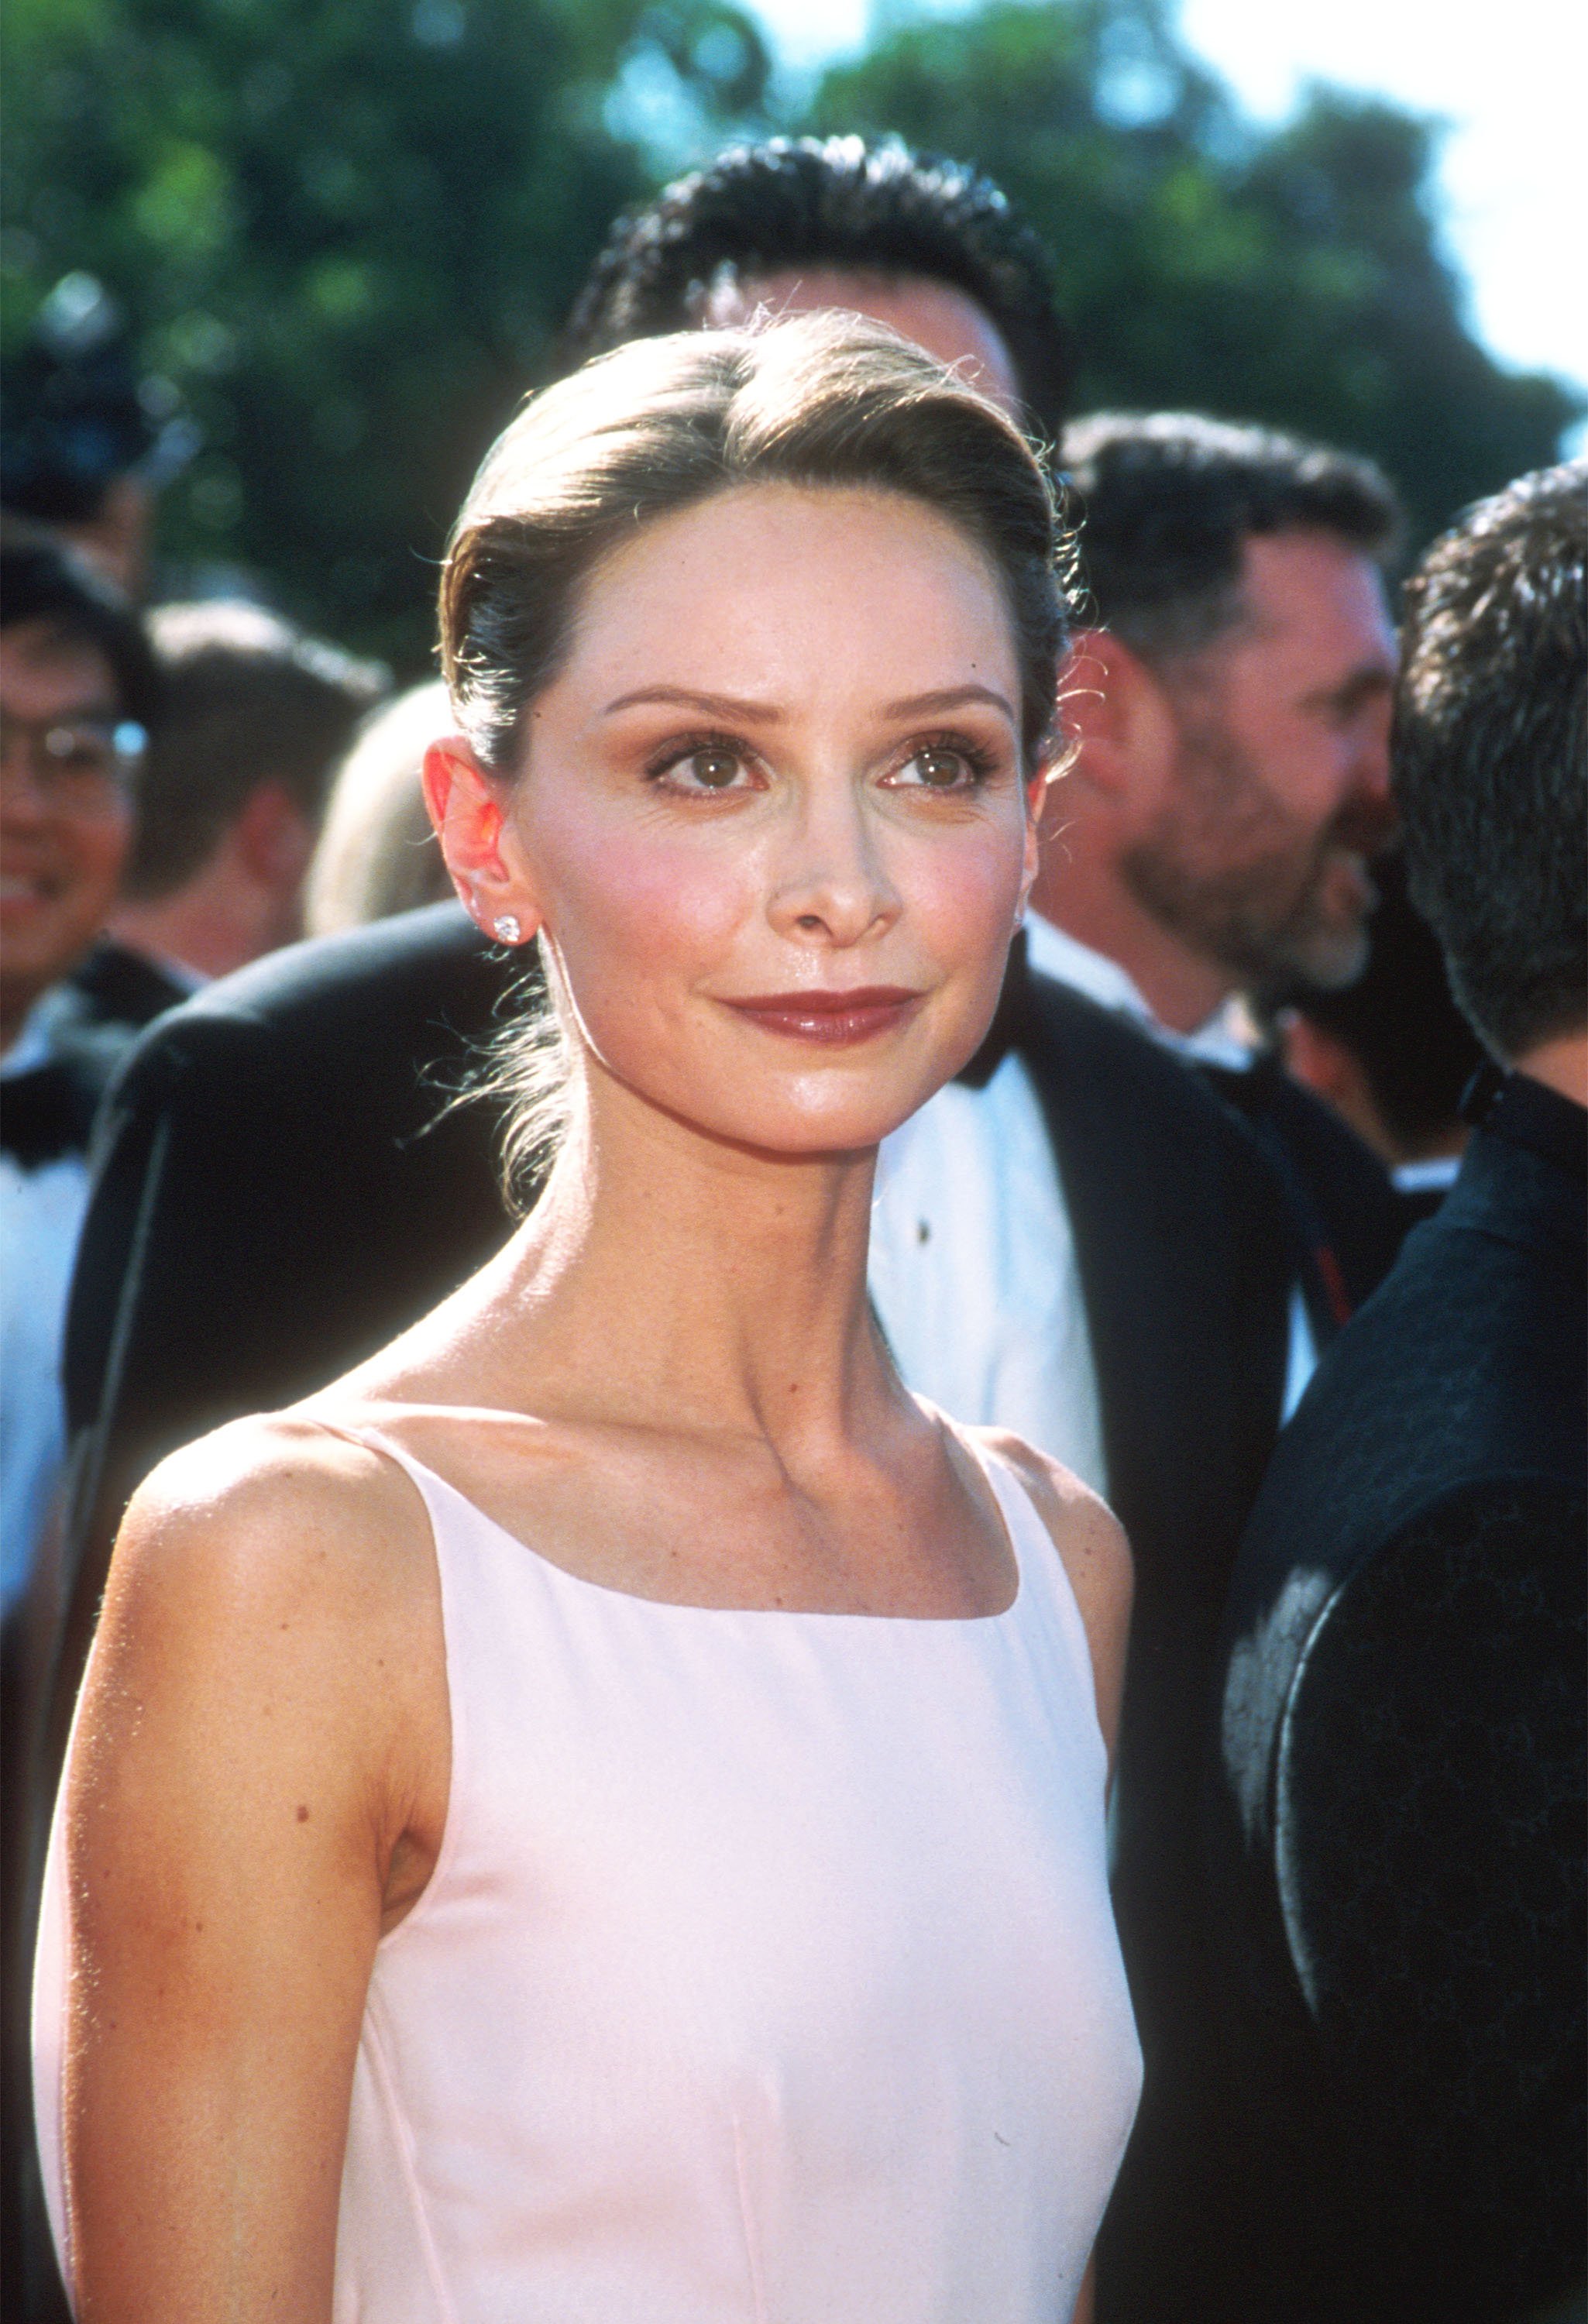 Calista Flockhart is pictured as she arrives at the 1998 Emmy Awards in Los Angeles, CA on September 13, 1998 | Source: Getty Images